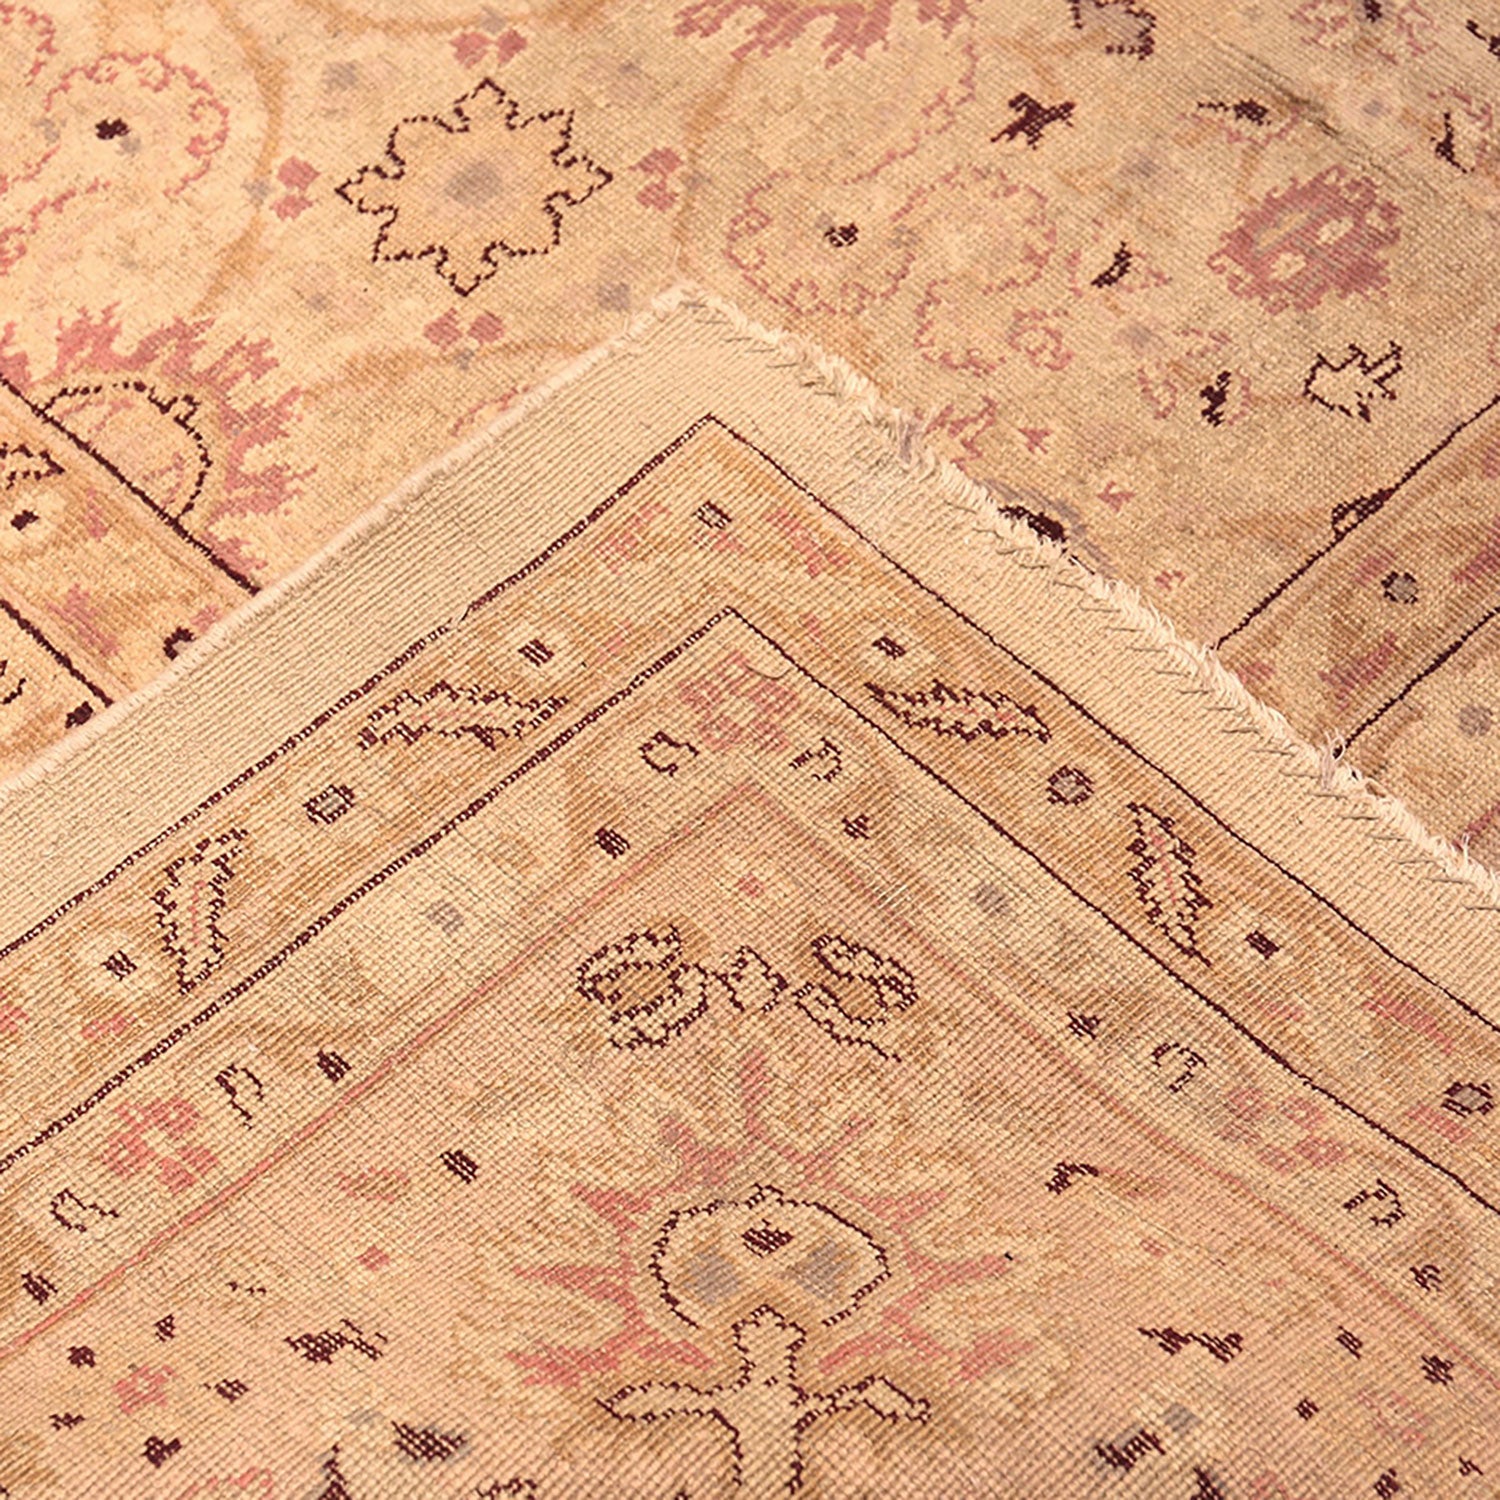 A close-up of a vintage rug with faded geometric and floral patterns.